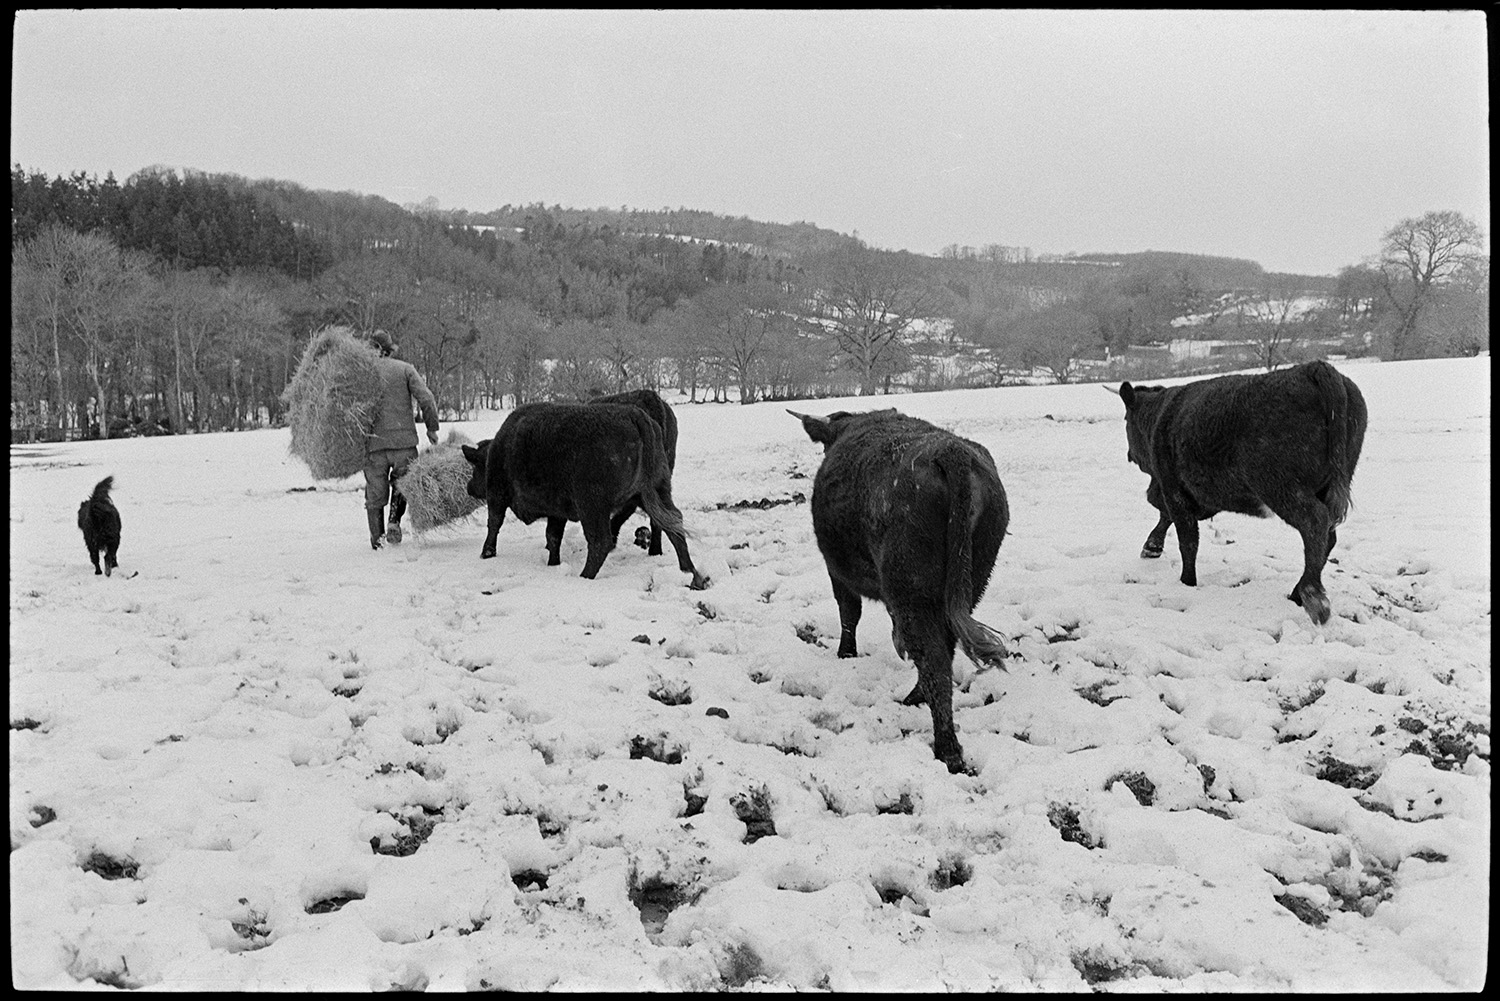 Snow, farmer taking hay to bullocks, Devon reds with horns, dog. 
[Alf Pugsley taking hay to Red Devon bullocks in a snow covered field at Langham, Dolton. He is accompanied by a dog. A landscape of snow covered fields and woodland can be seen in the background.]